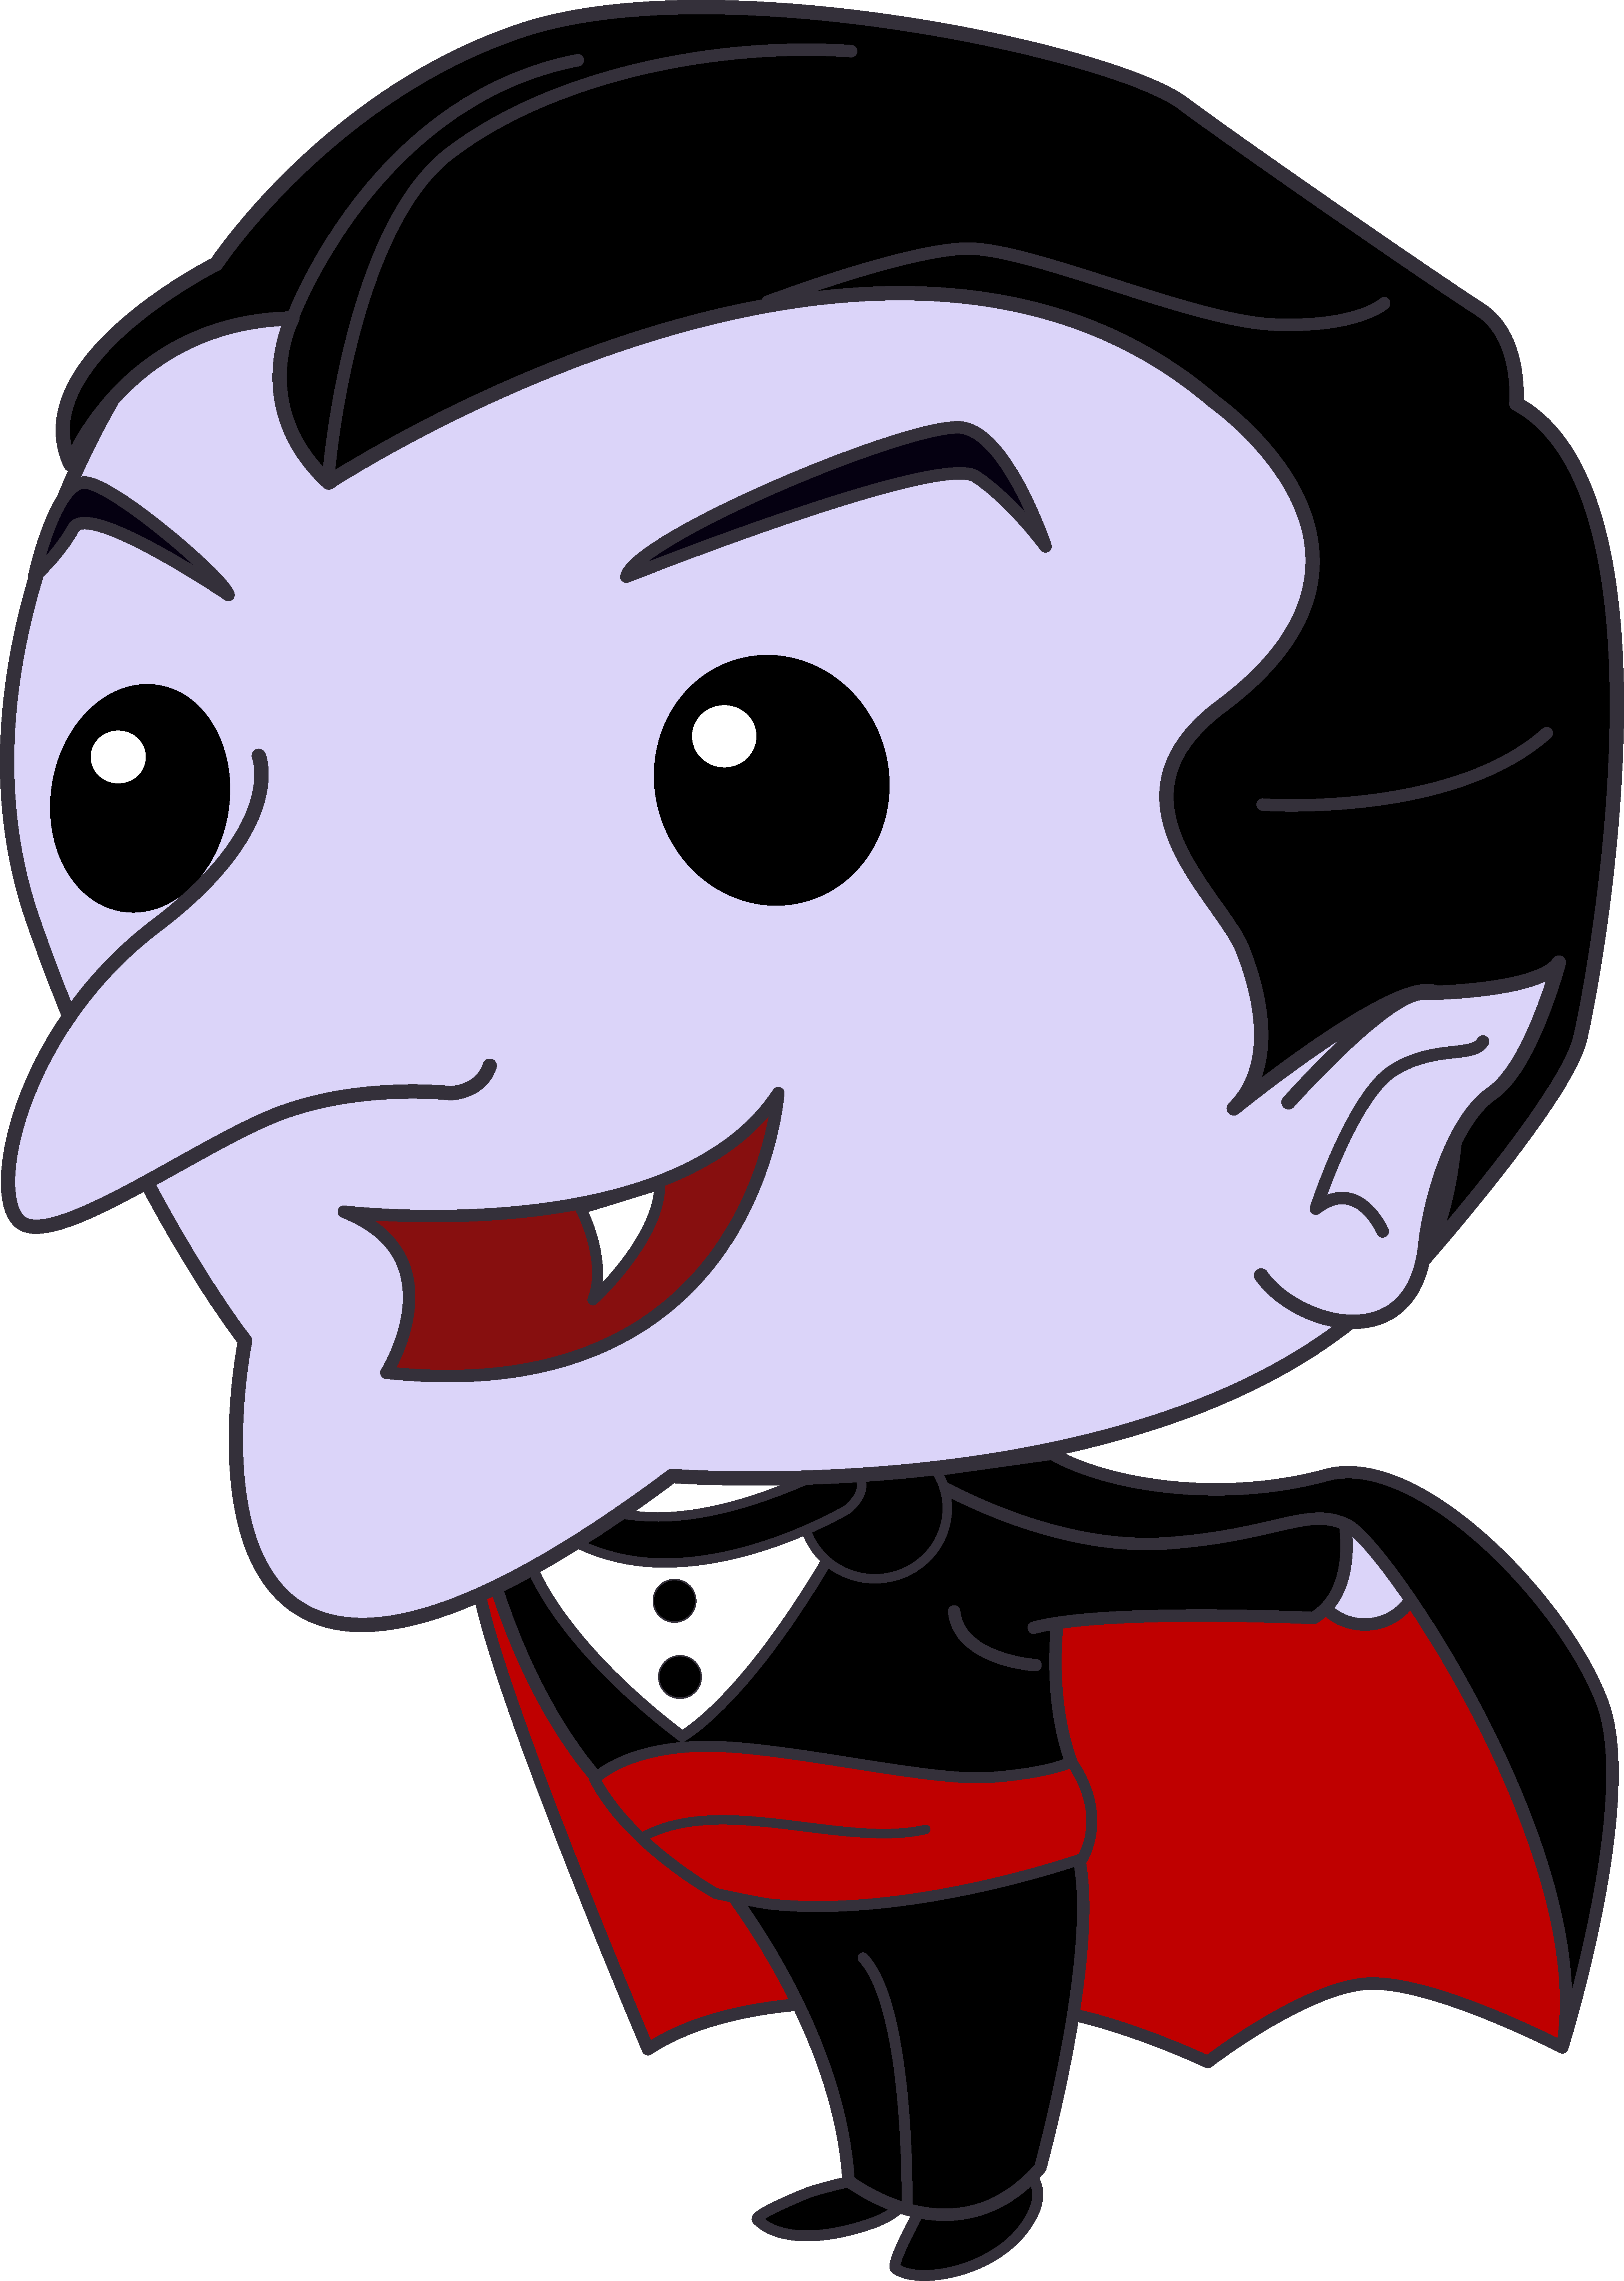 Vampire Cartoon Pictures Cliparts.co